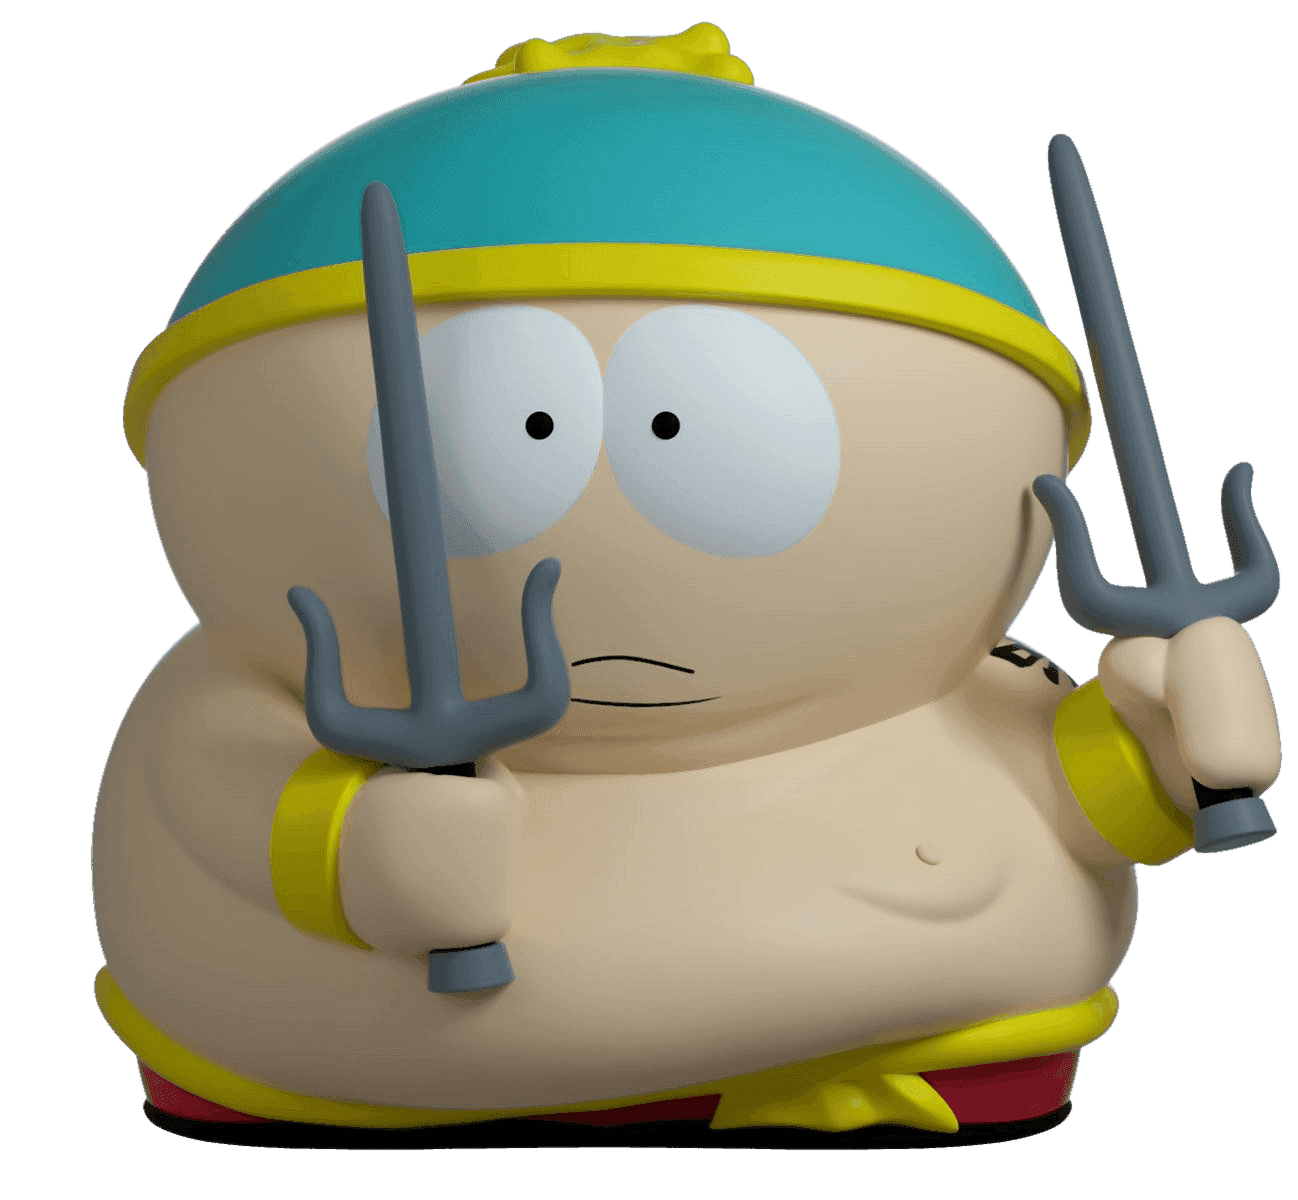 Youtooz - South Park - "Good Times With Weapons" Cartman Vinyl Figure #6 - The Card Vault